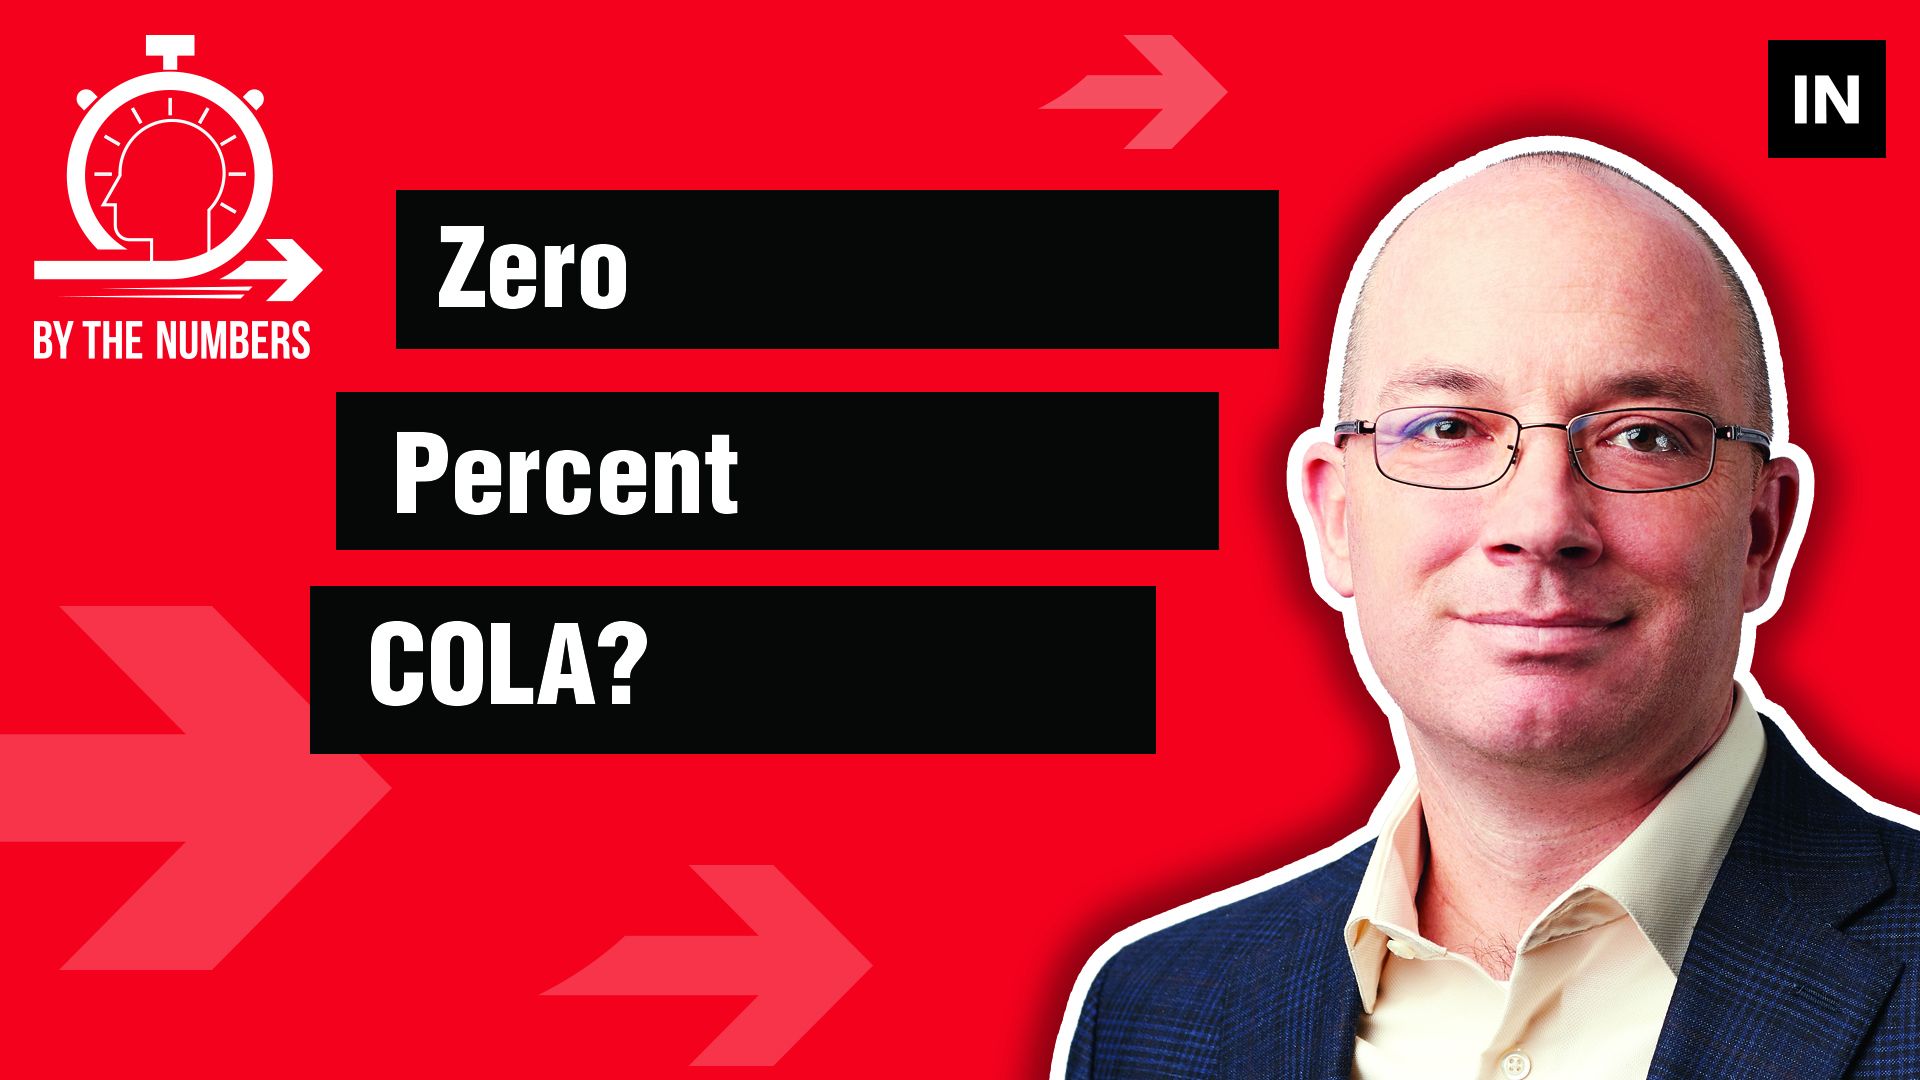 By the Numbers: Zero percent COLA?